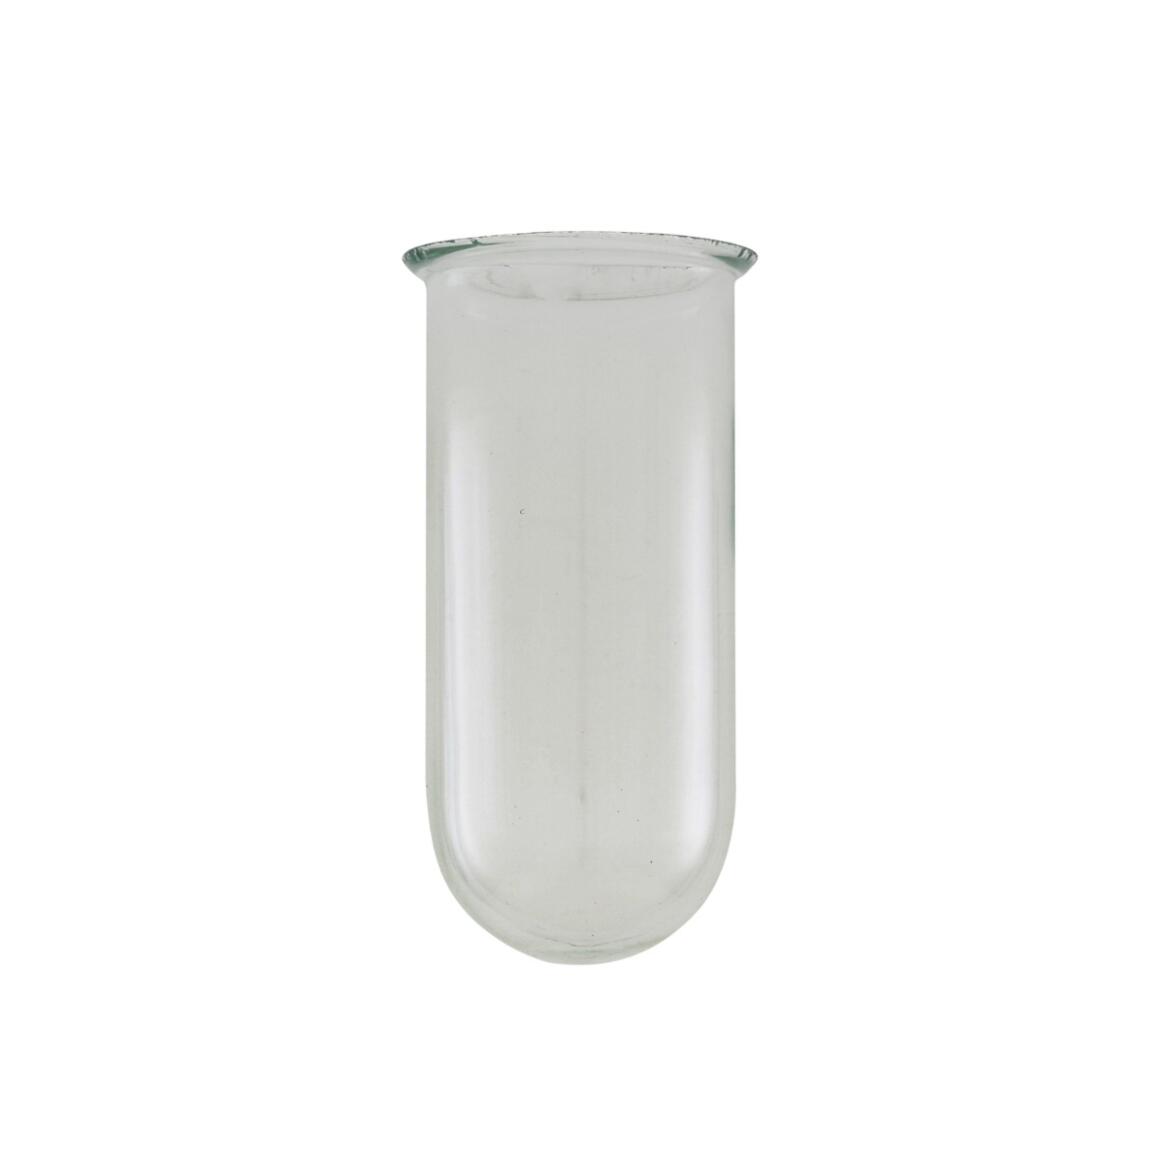 Clear well glass lamp shade main product image